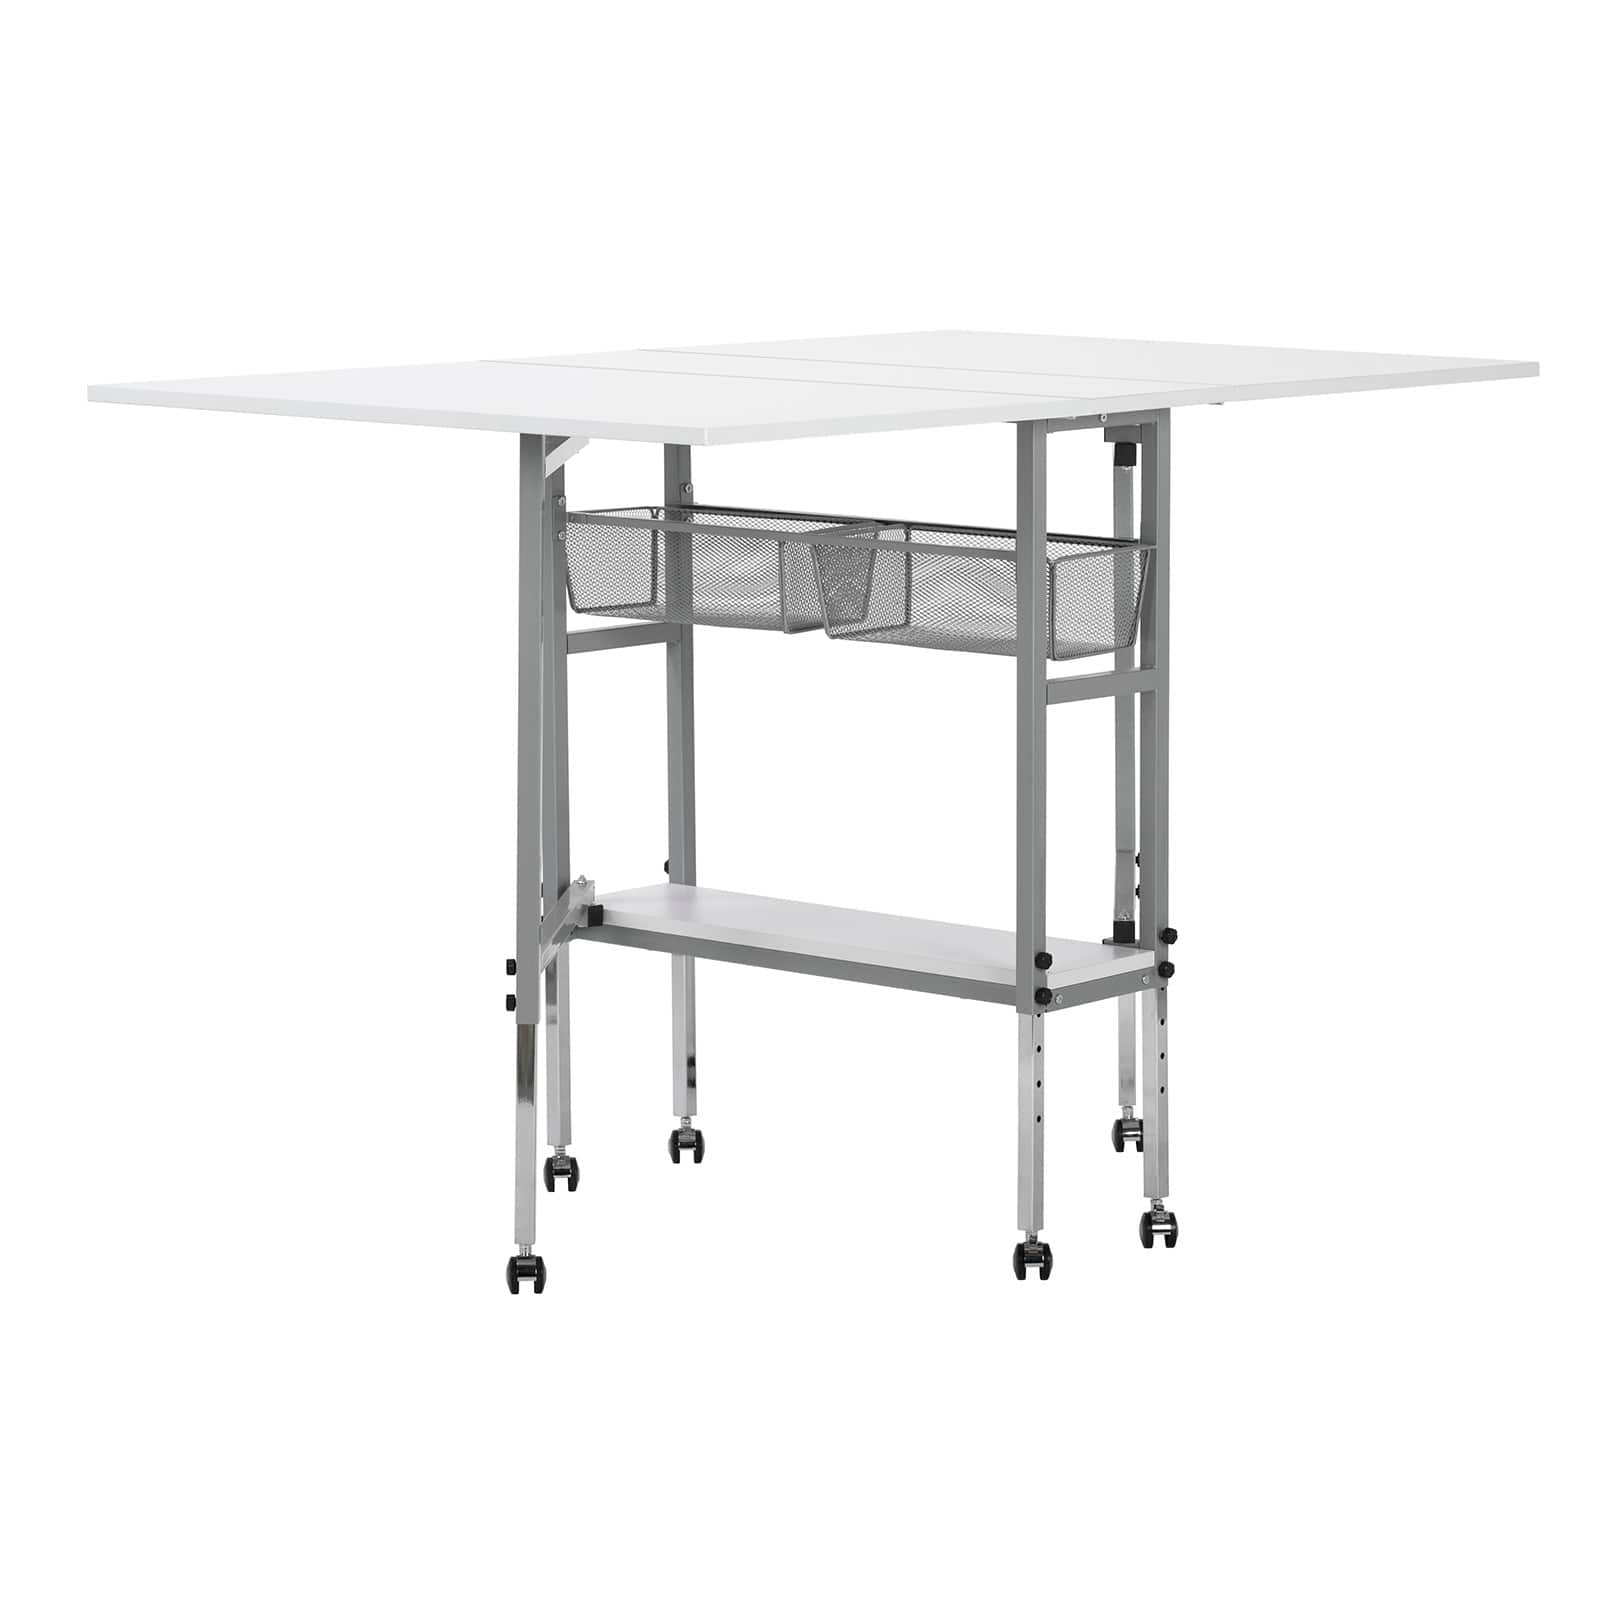 Sew Ready Craft and Cutting Table 58.75 Wide in Silver / White